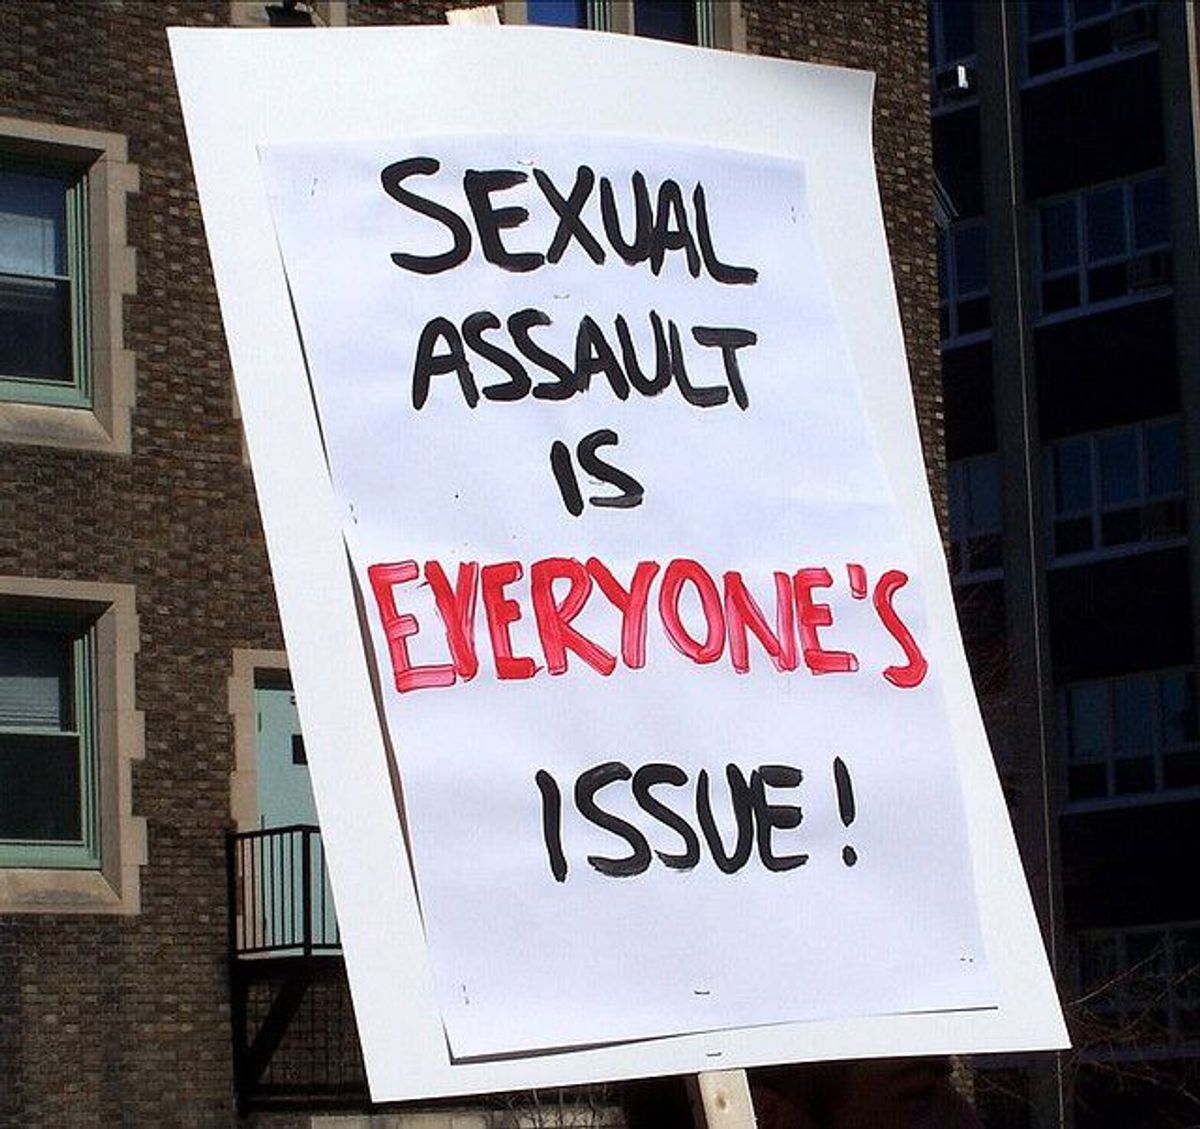 Sexual Assault: Let's Not Be Part Of The Problem